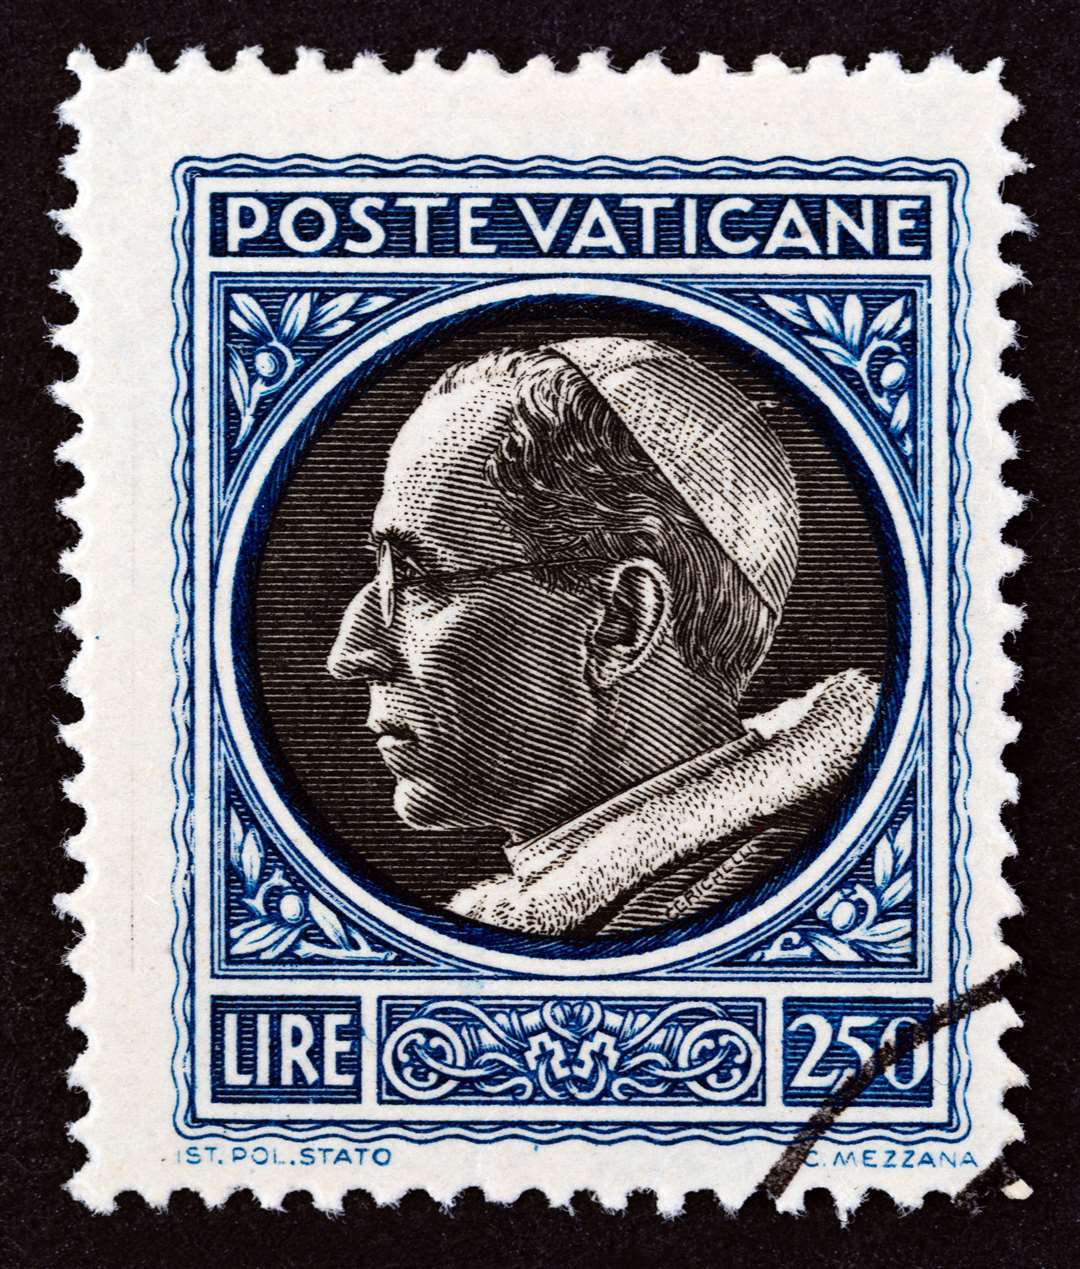 Pope Pius XII as featured in a Vatican City stamp from 1945. He visited the POW camp Bill Johns was held in and sent him a new accordion. Picture: Adobe Stock